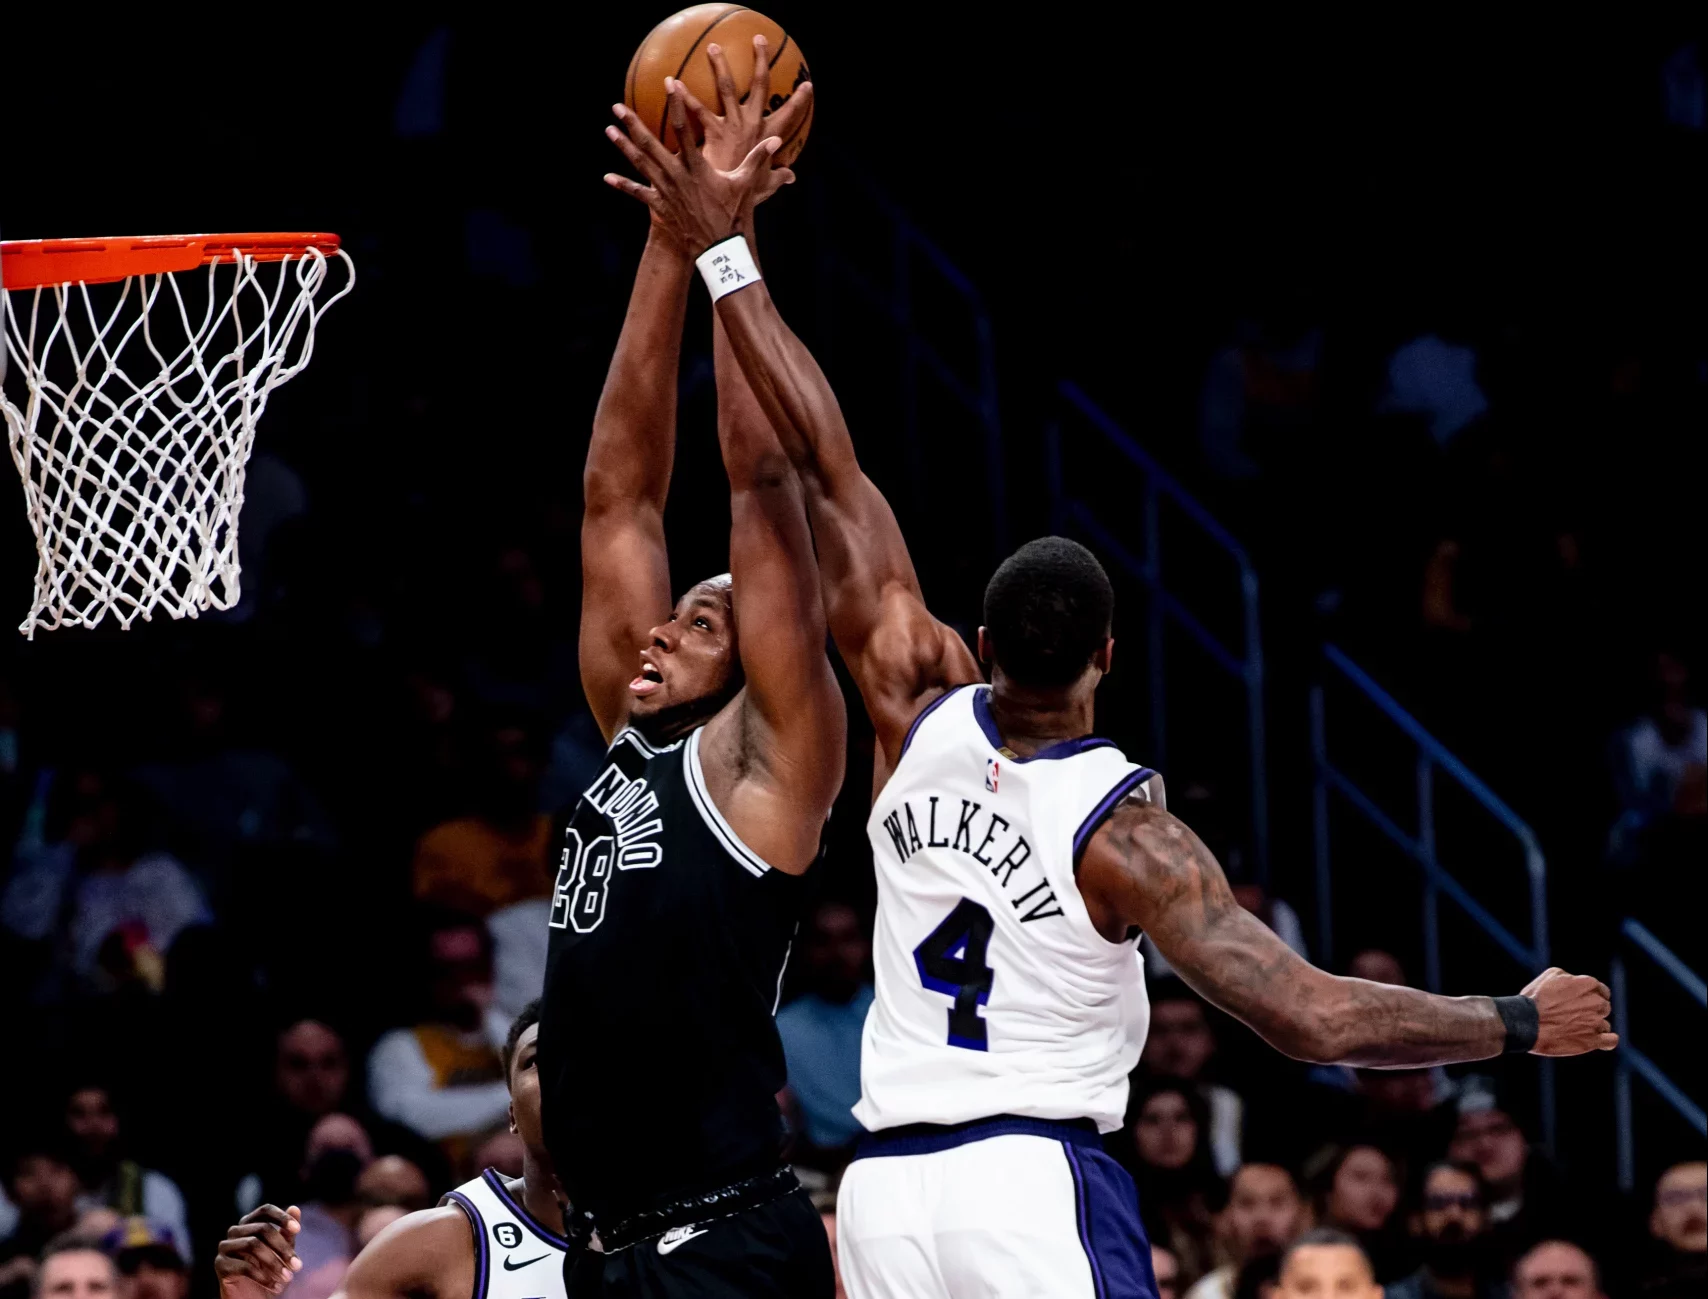 The San Antonio Spurs fell to the Los Angeles Lakers on Sunday night 123-92.